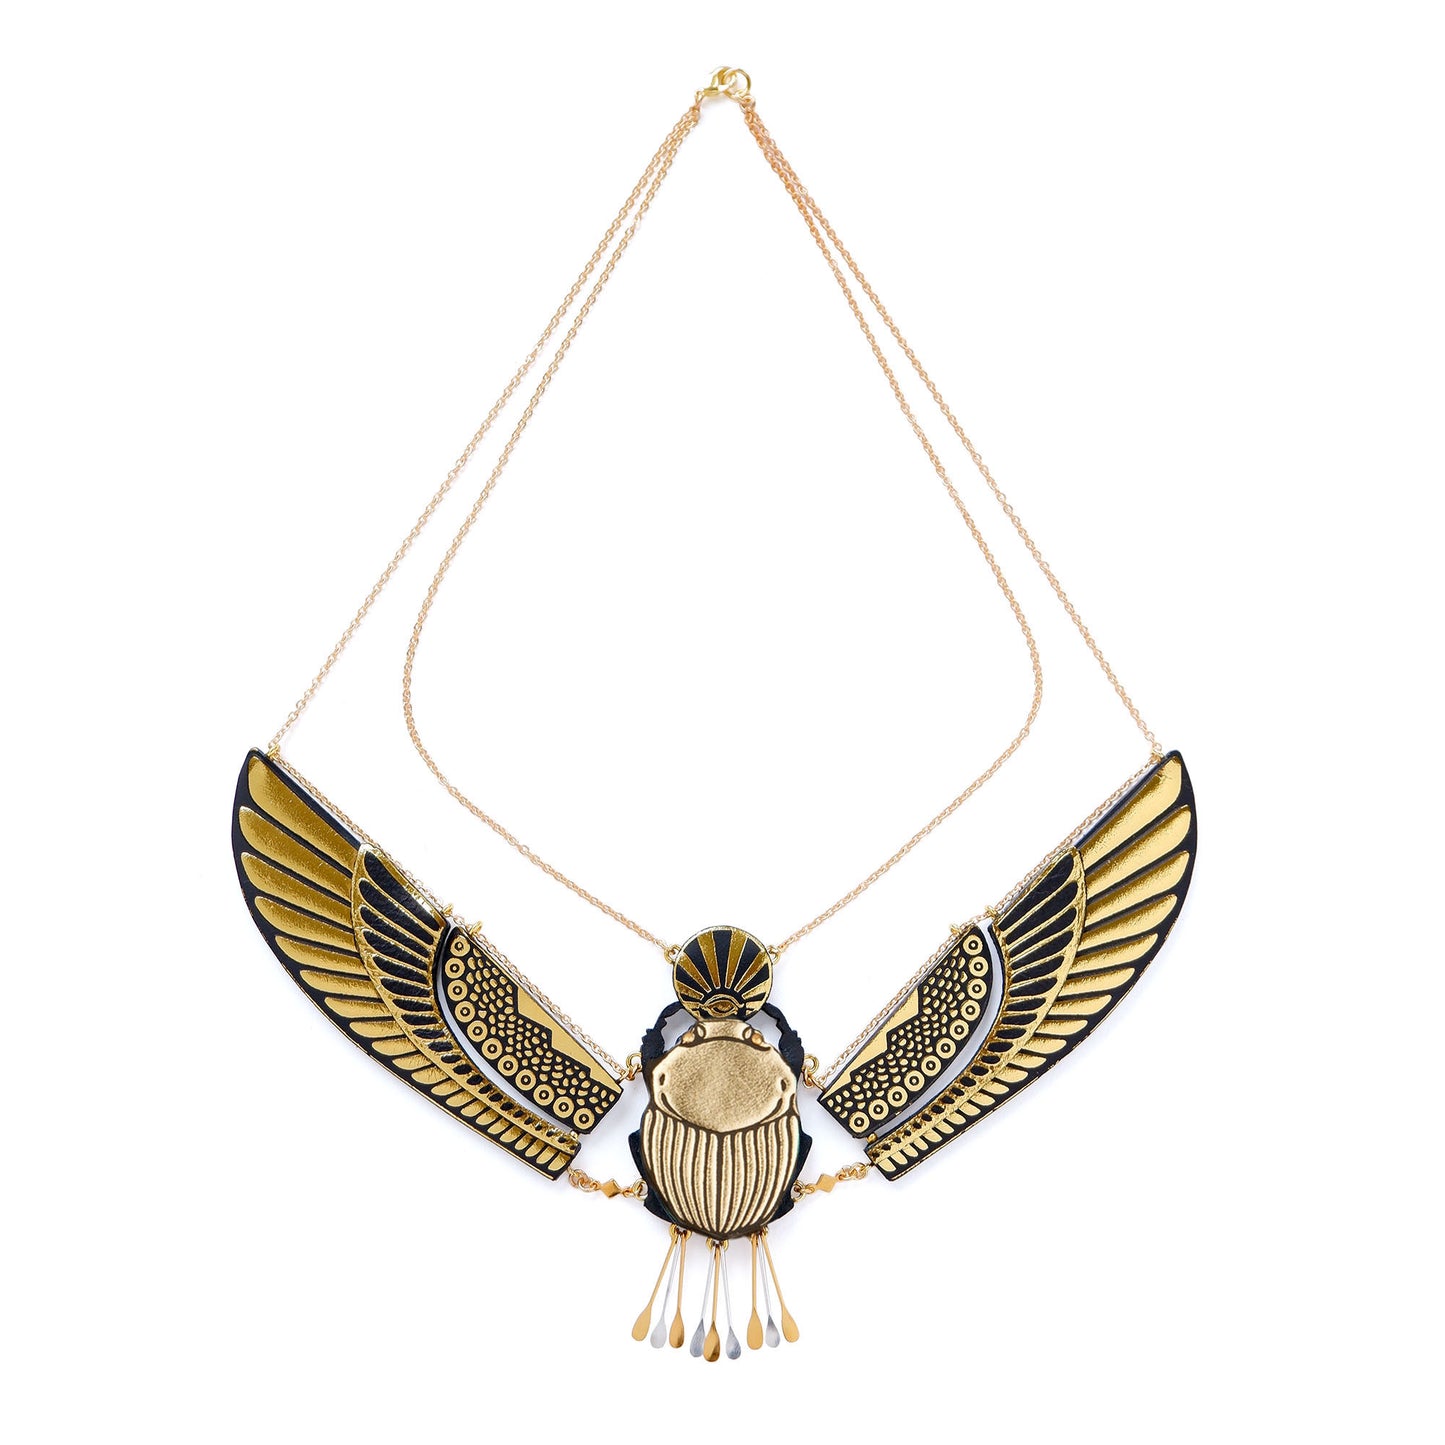 gold sacred scarab necklace with gold wings. Made from printed leather, on fine gold chain